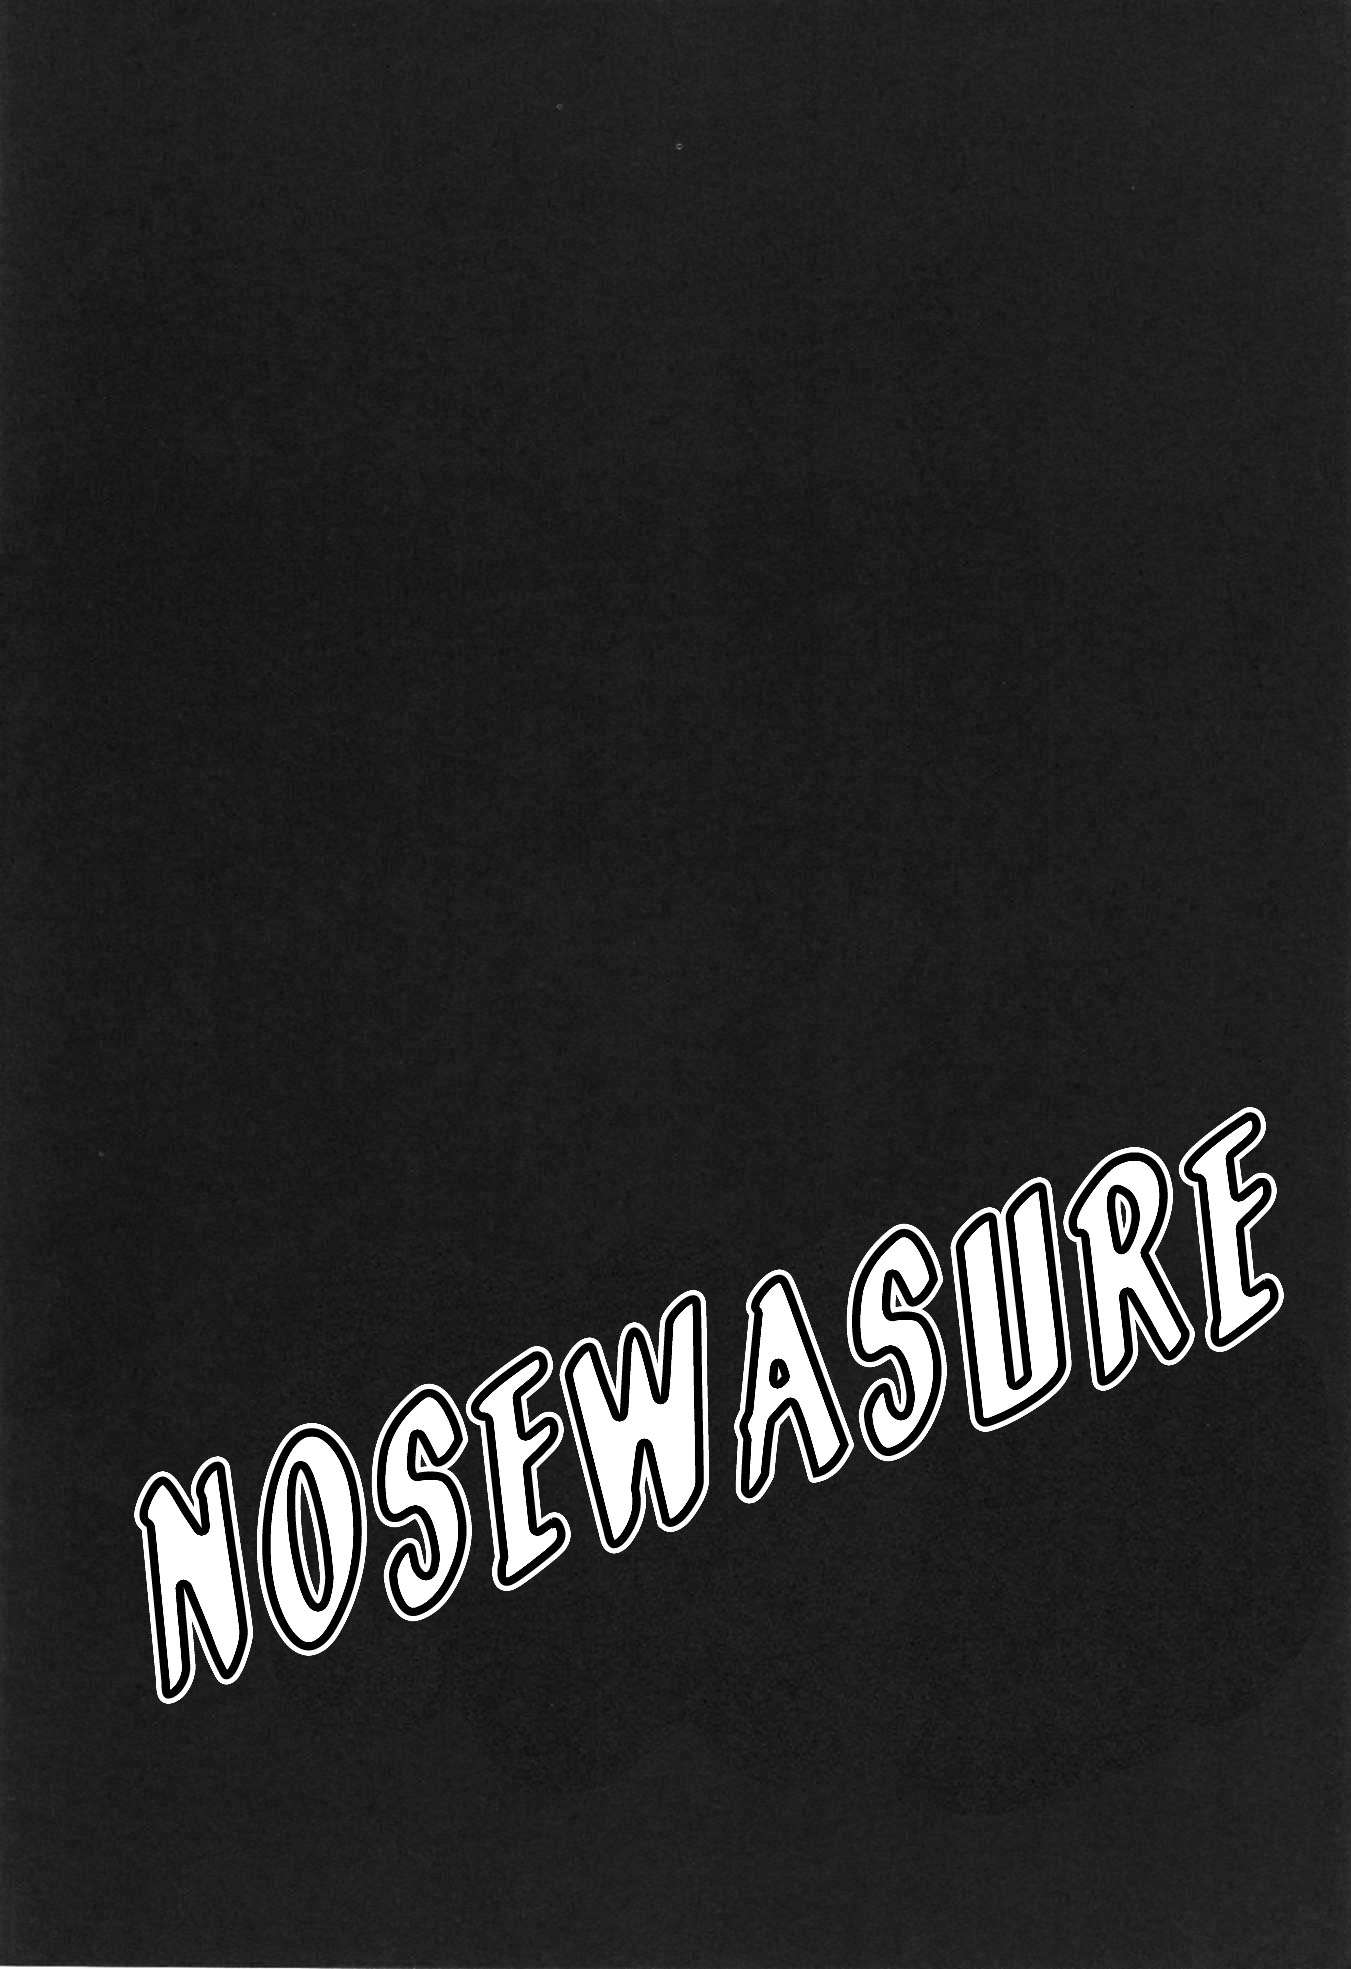 Nosewasure Completo Chapter-2 - 0